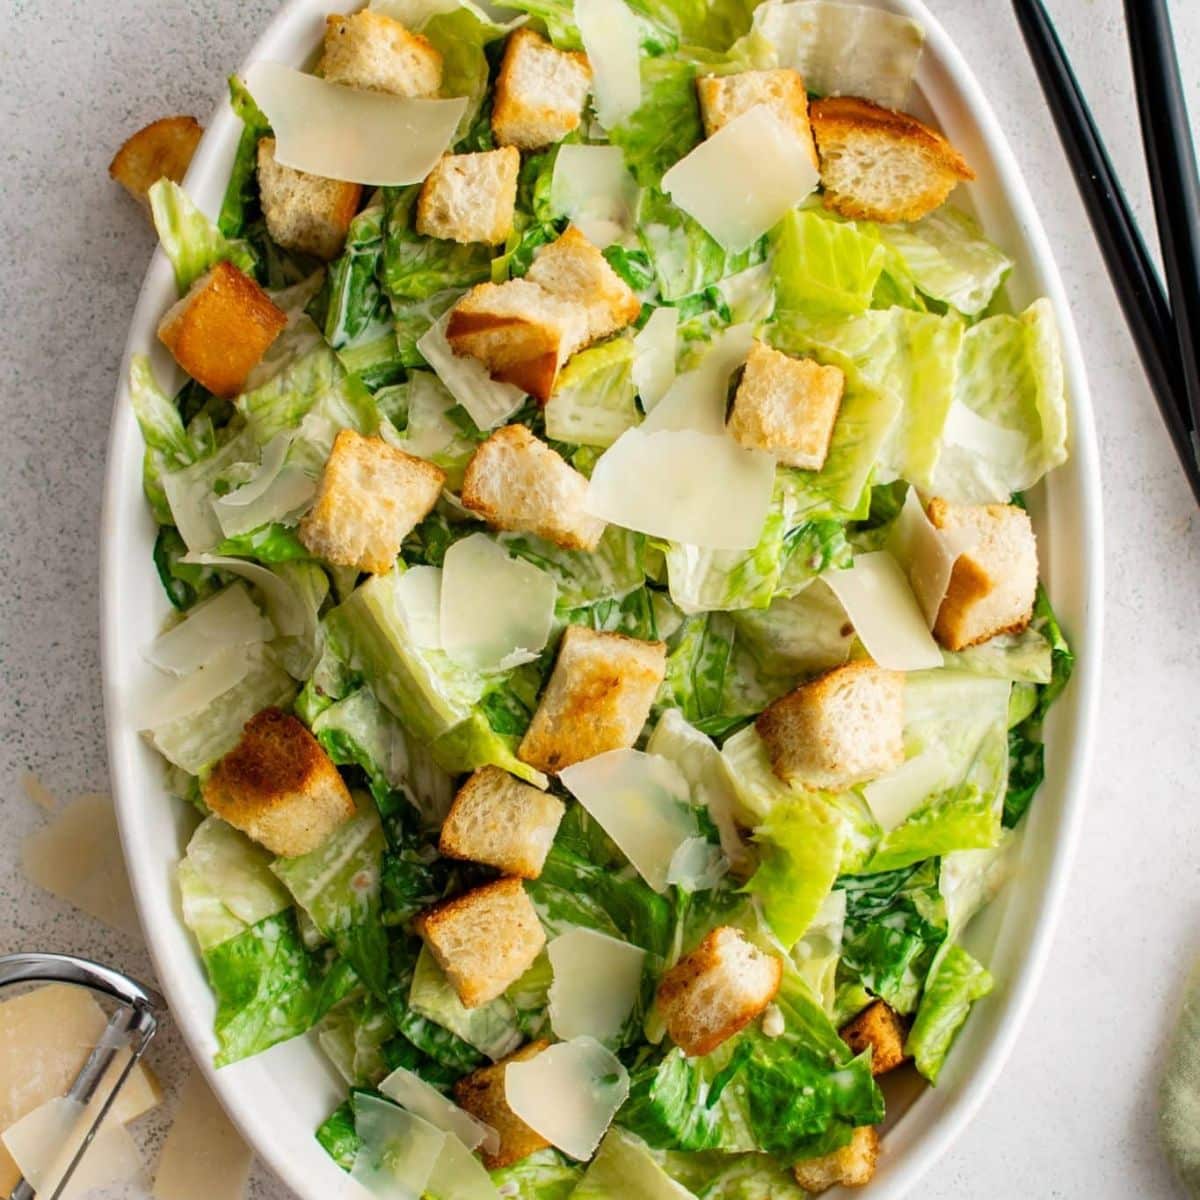 Caesar salad with croutons and shaved parmesan on a platter.